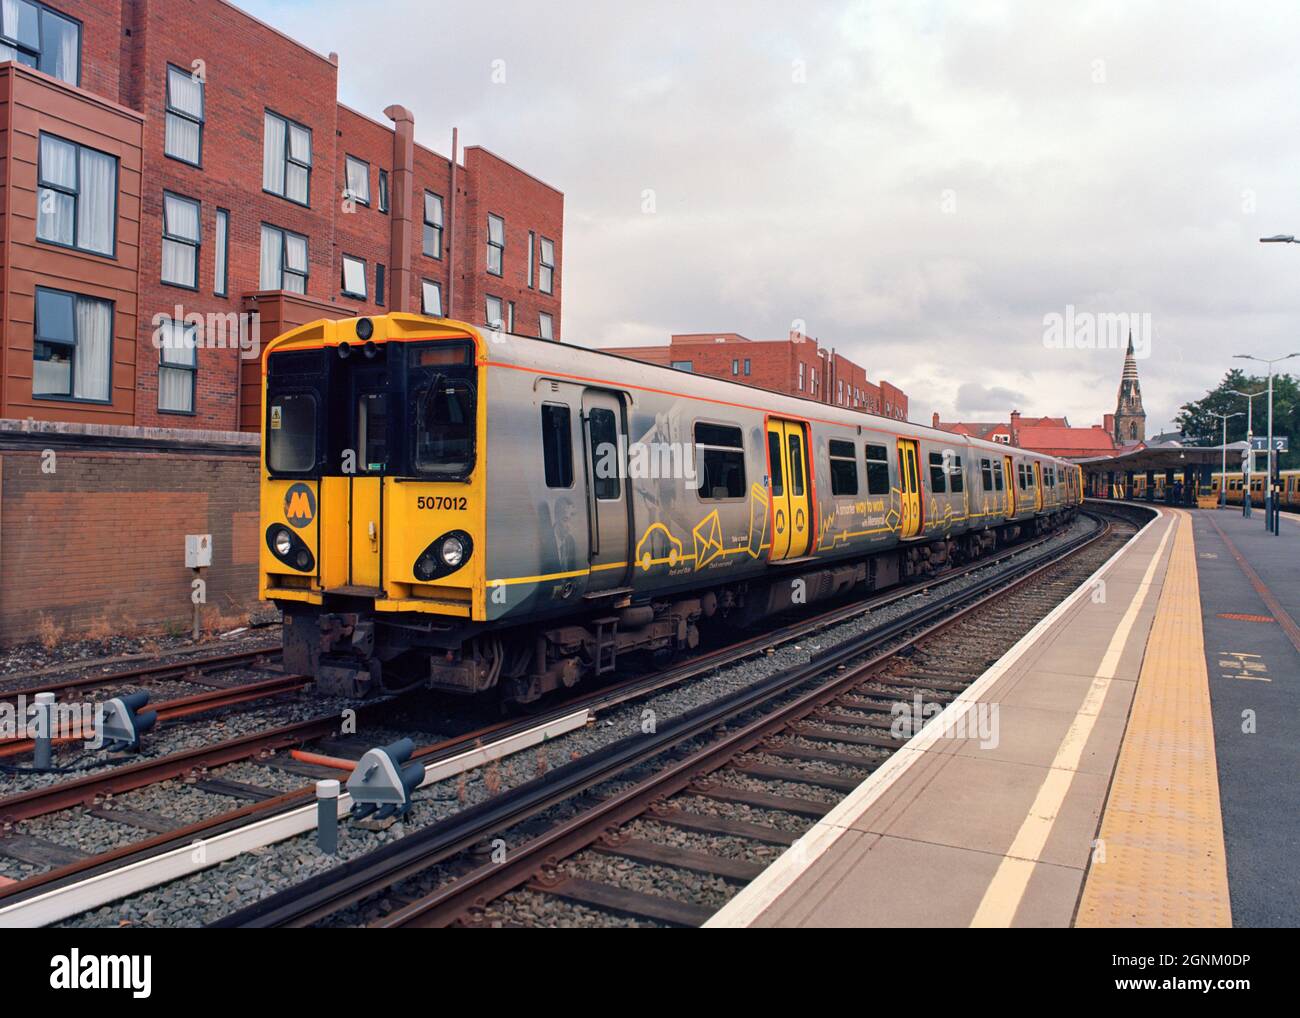 New Brighton, UK - 11 September 2021: The Merseyrail electric train (Class 507) at the siding of New Brighton station. Stock Photo